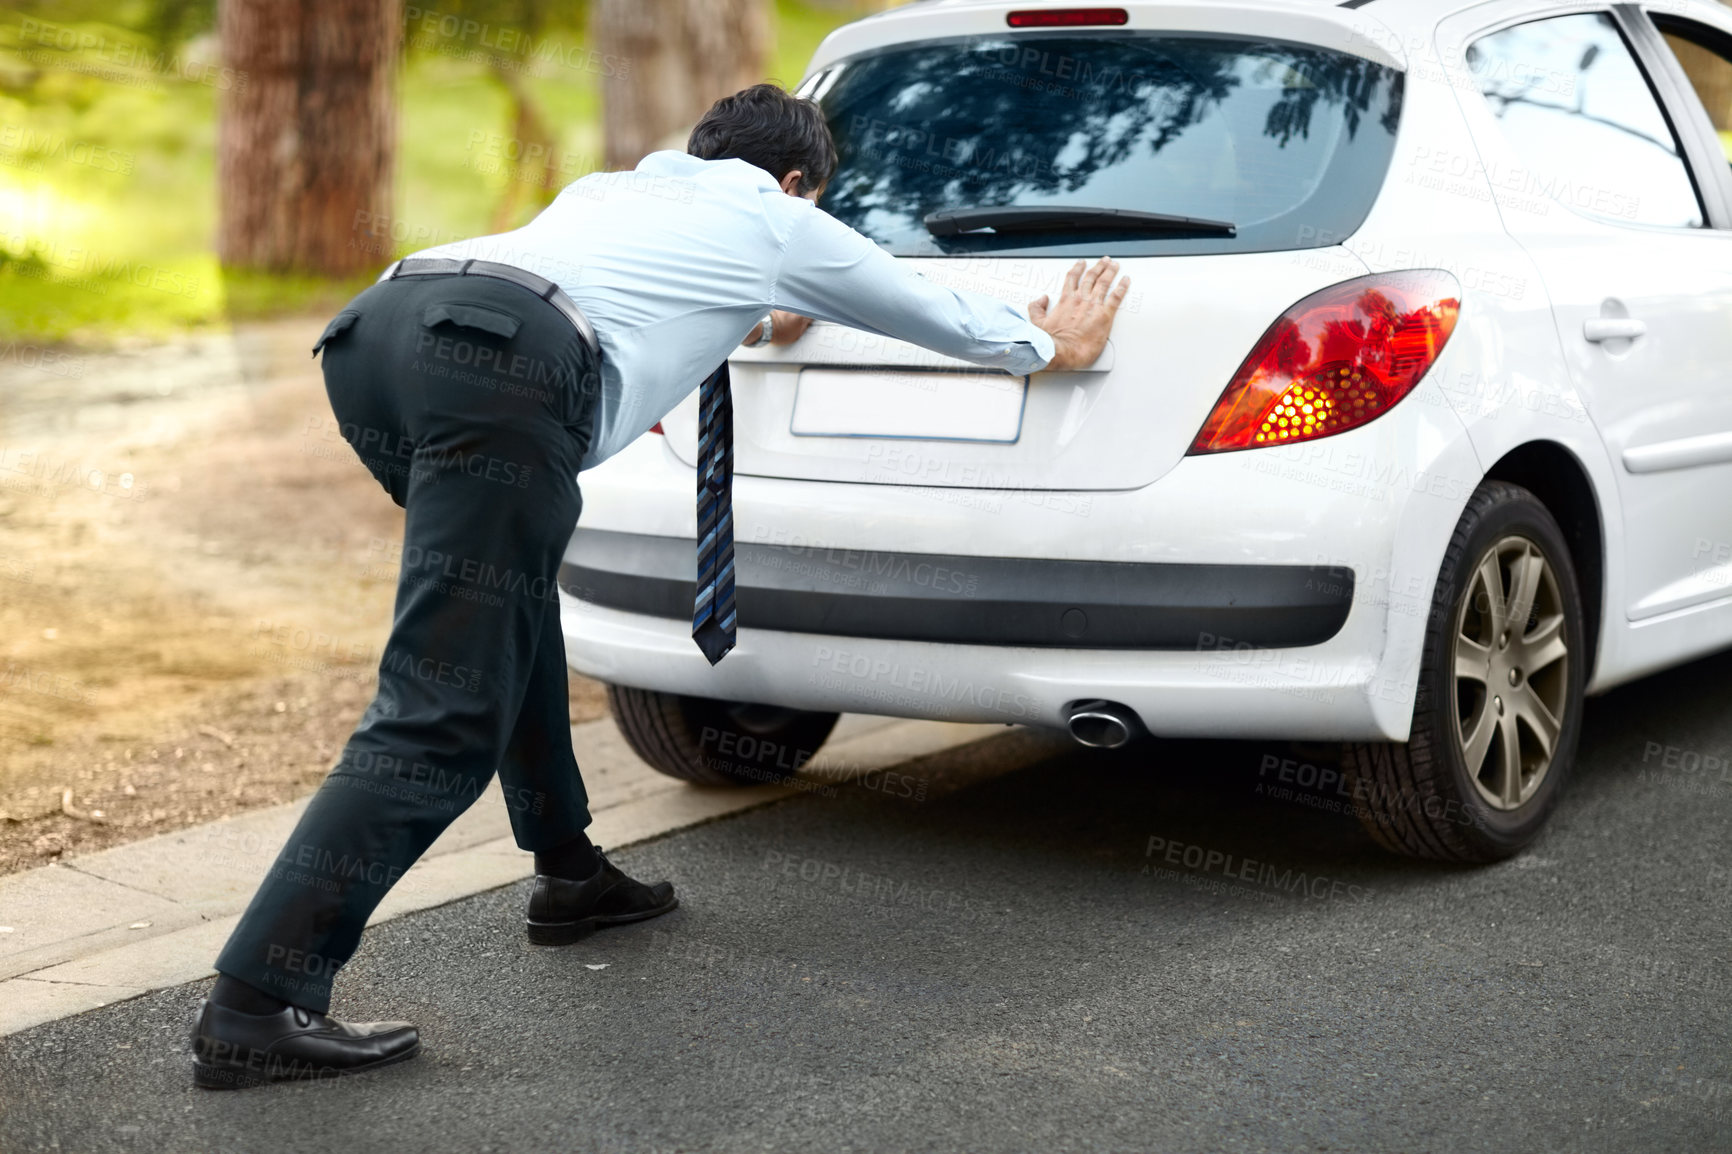 Buy stock photo Businessman, push vehicle or breakdown on road engine fail, emergency tyre or auto service. Male person, strength and work car transport stop or gas petrol crisis travel, oil or risk accident repair